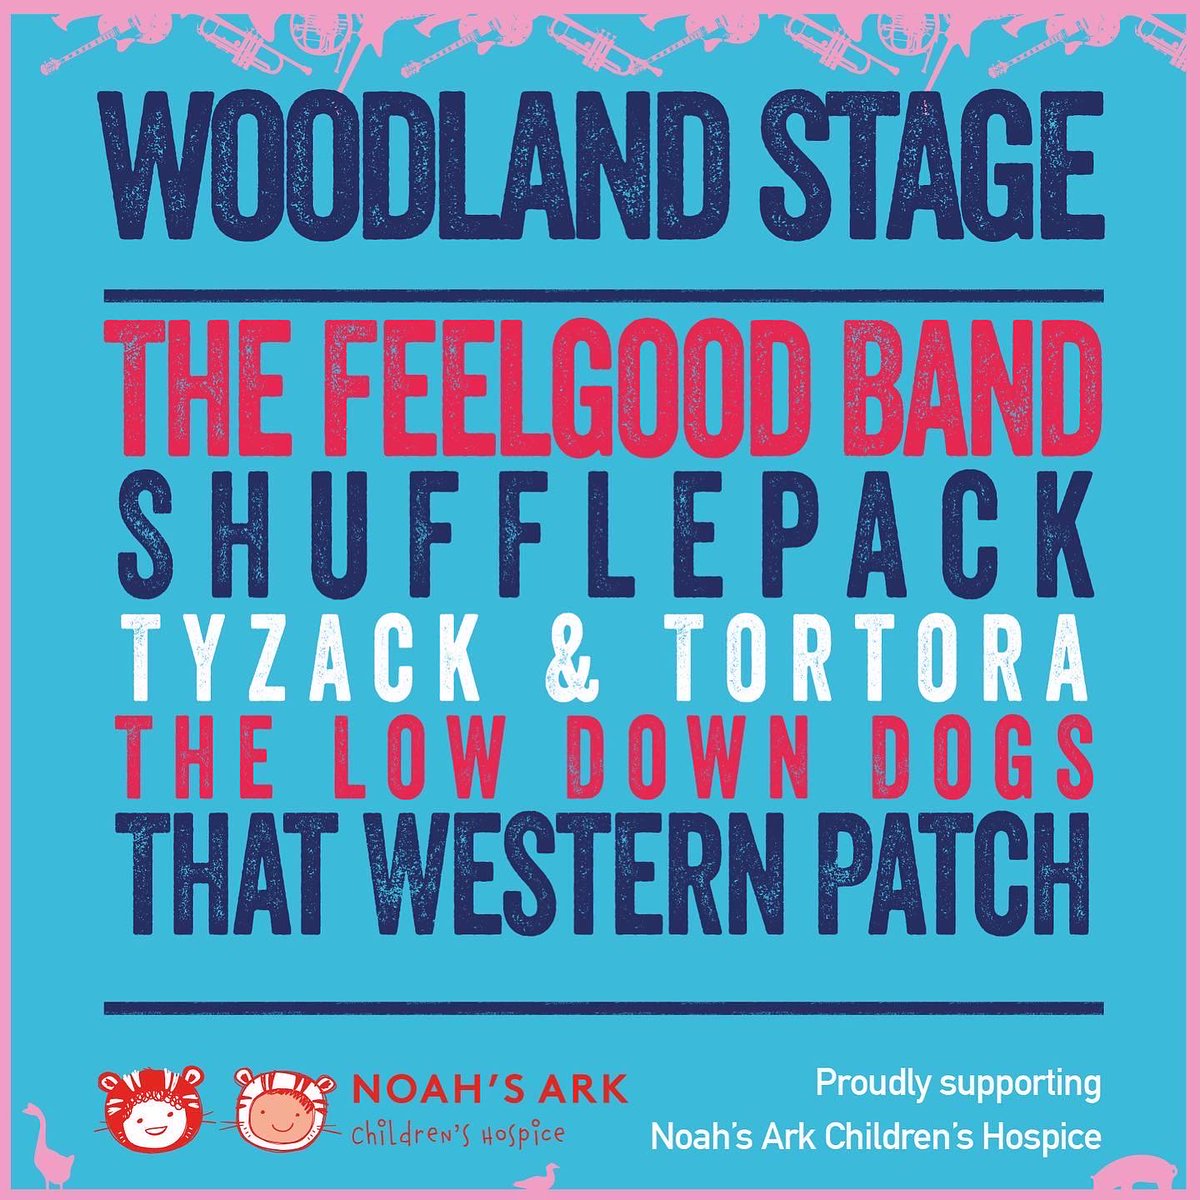 Livestock Music Festival 2022. Woodland stage line-up out now. Tickets still available at buytickets.at/livestockmusic… #LivestockMusic #LiveMusic #MusicFestival #GreatDaysOut #EnfieldEvents #FortyHall @Forty_Hall @fortyhallfarm @capelmanor